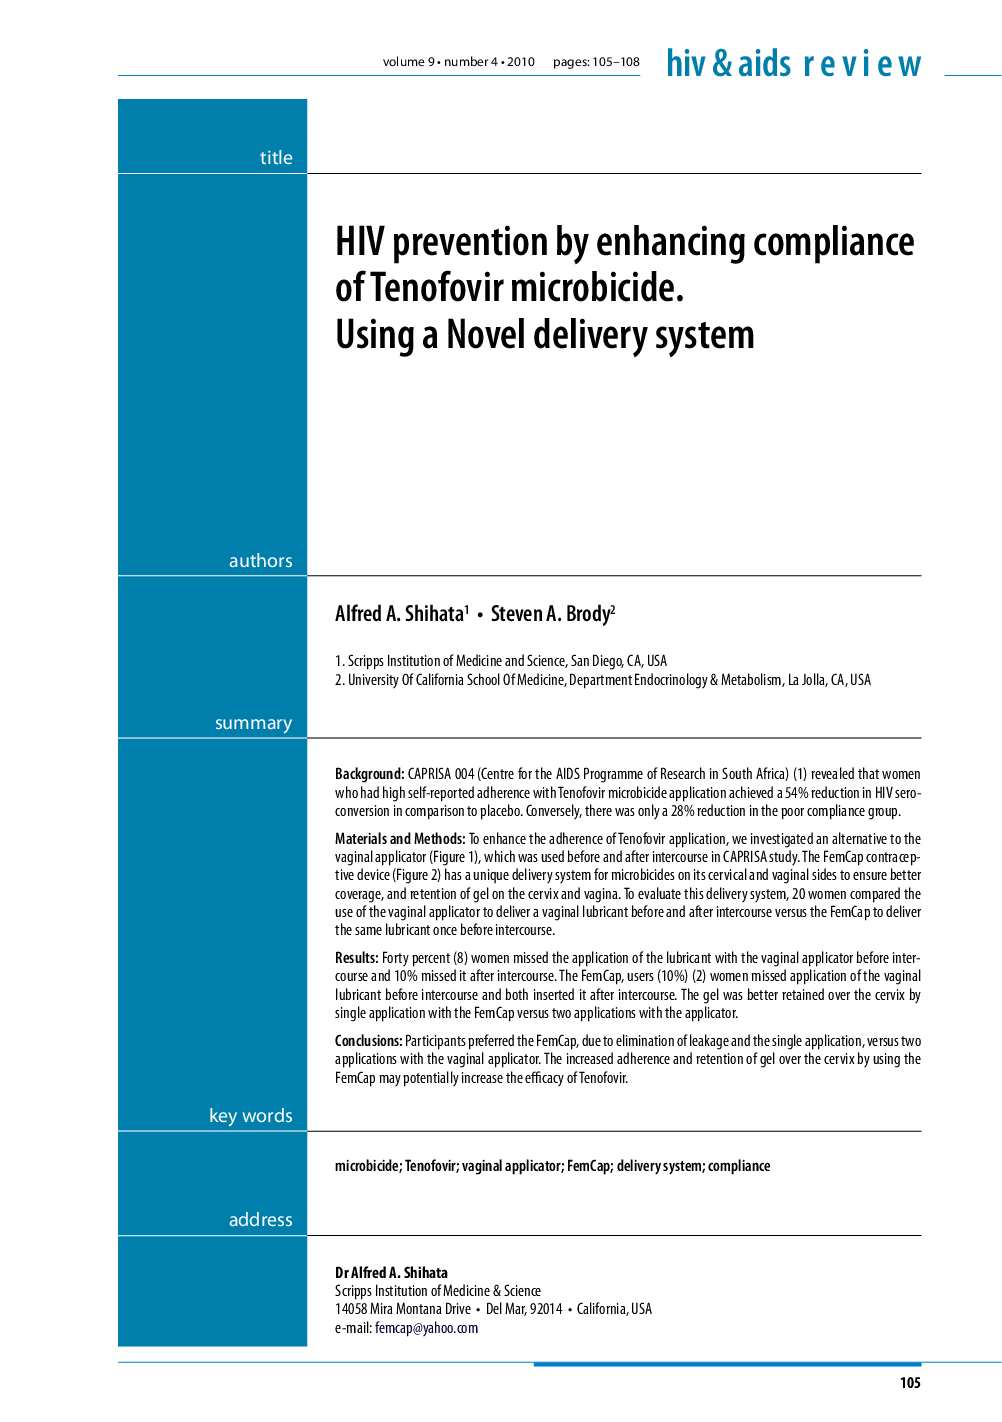 HIV prevention by enhancing compliance of Tenofovir microbicide. Using a Novel delivery system